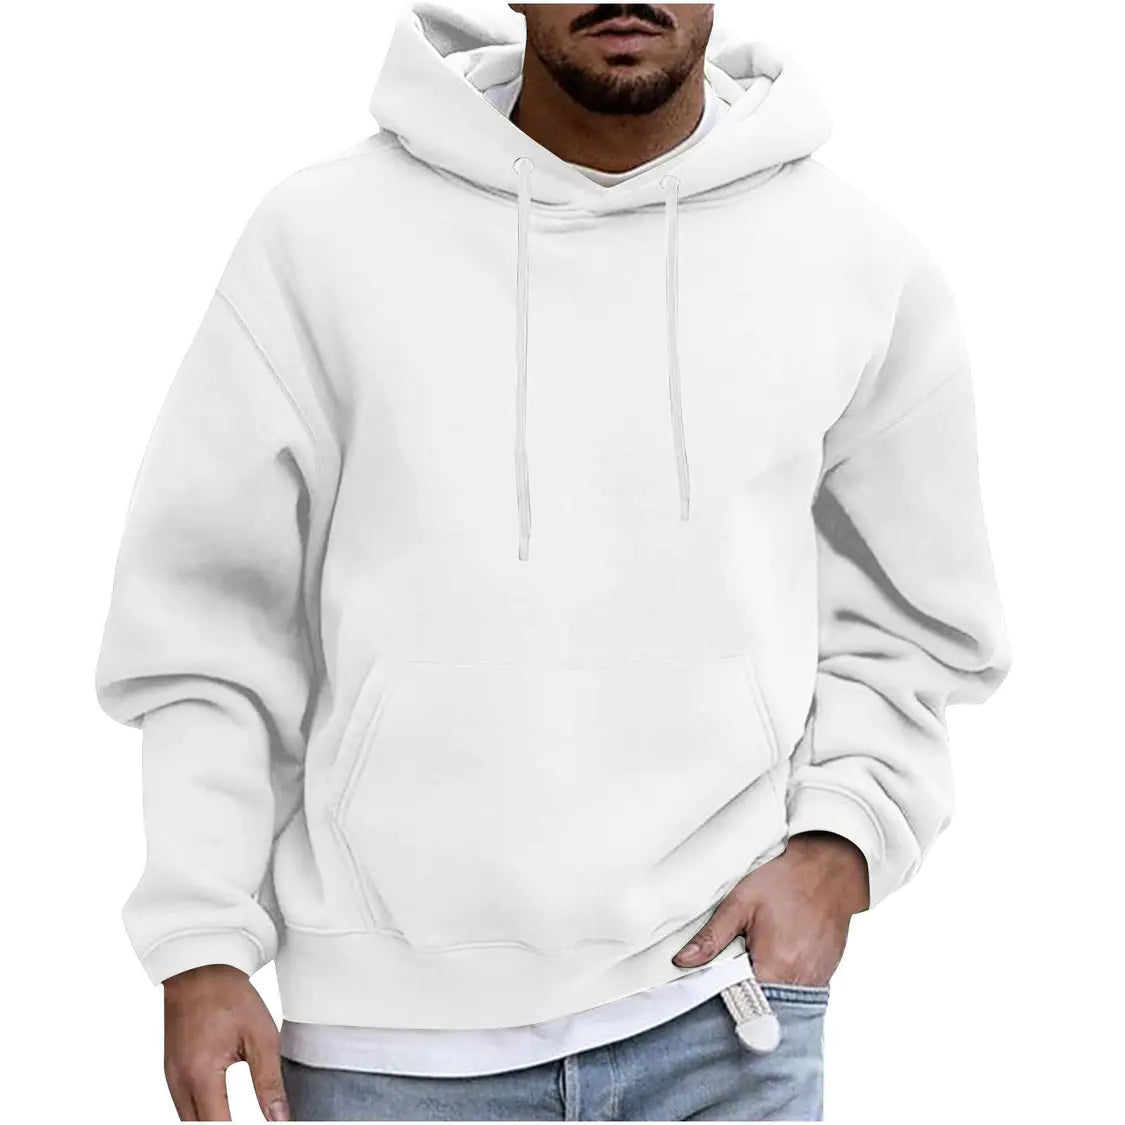 Comfortable Cotton Hoodie Featuring a Minimalistic Solid Color Style